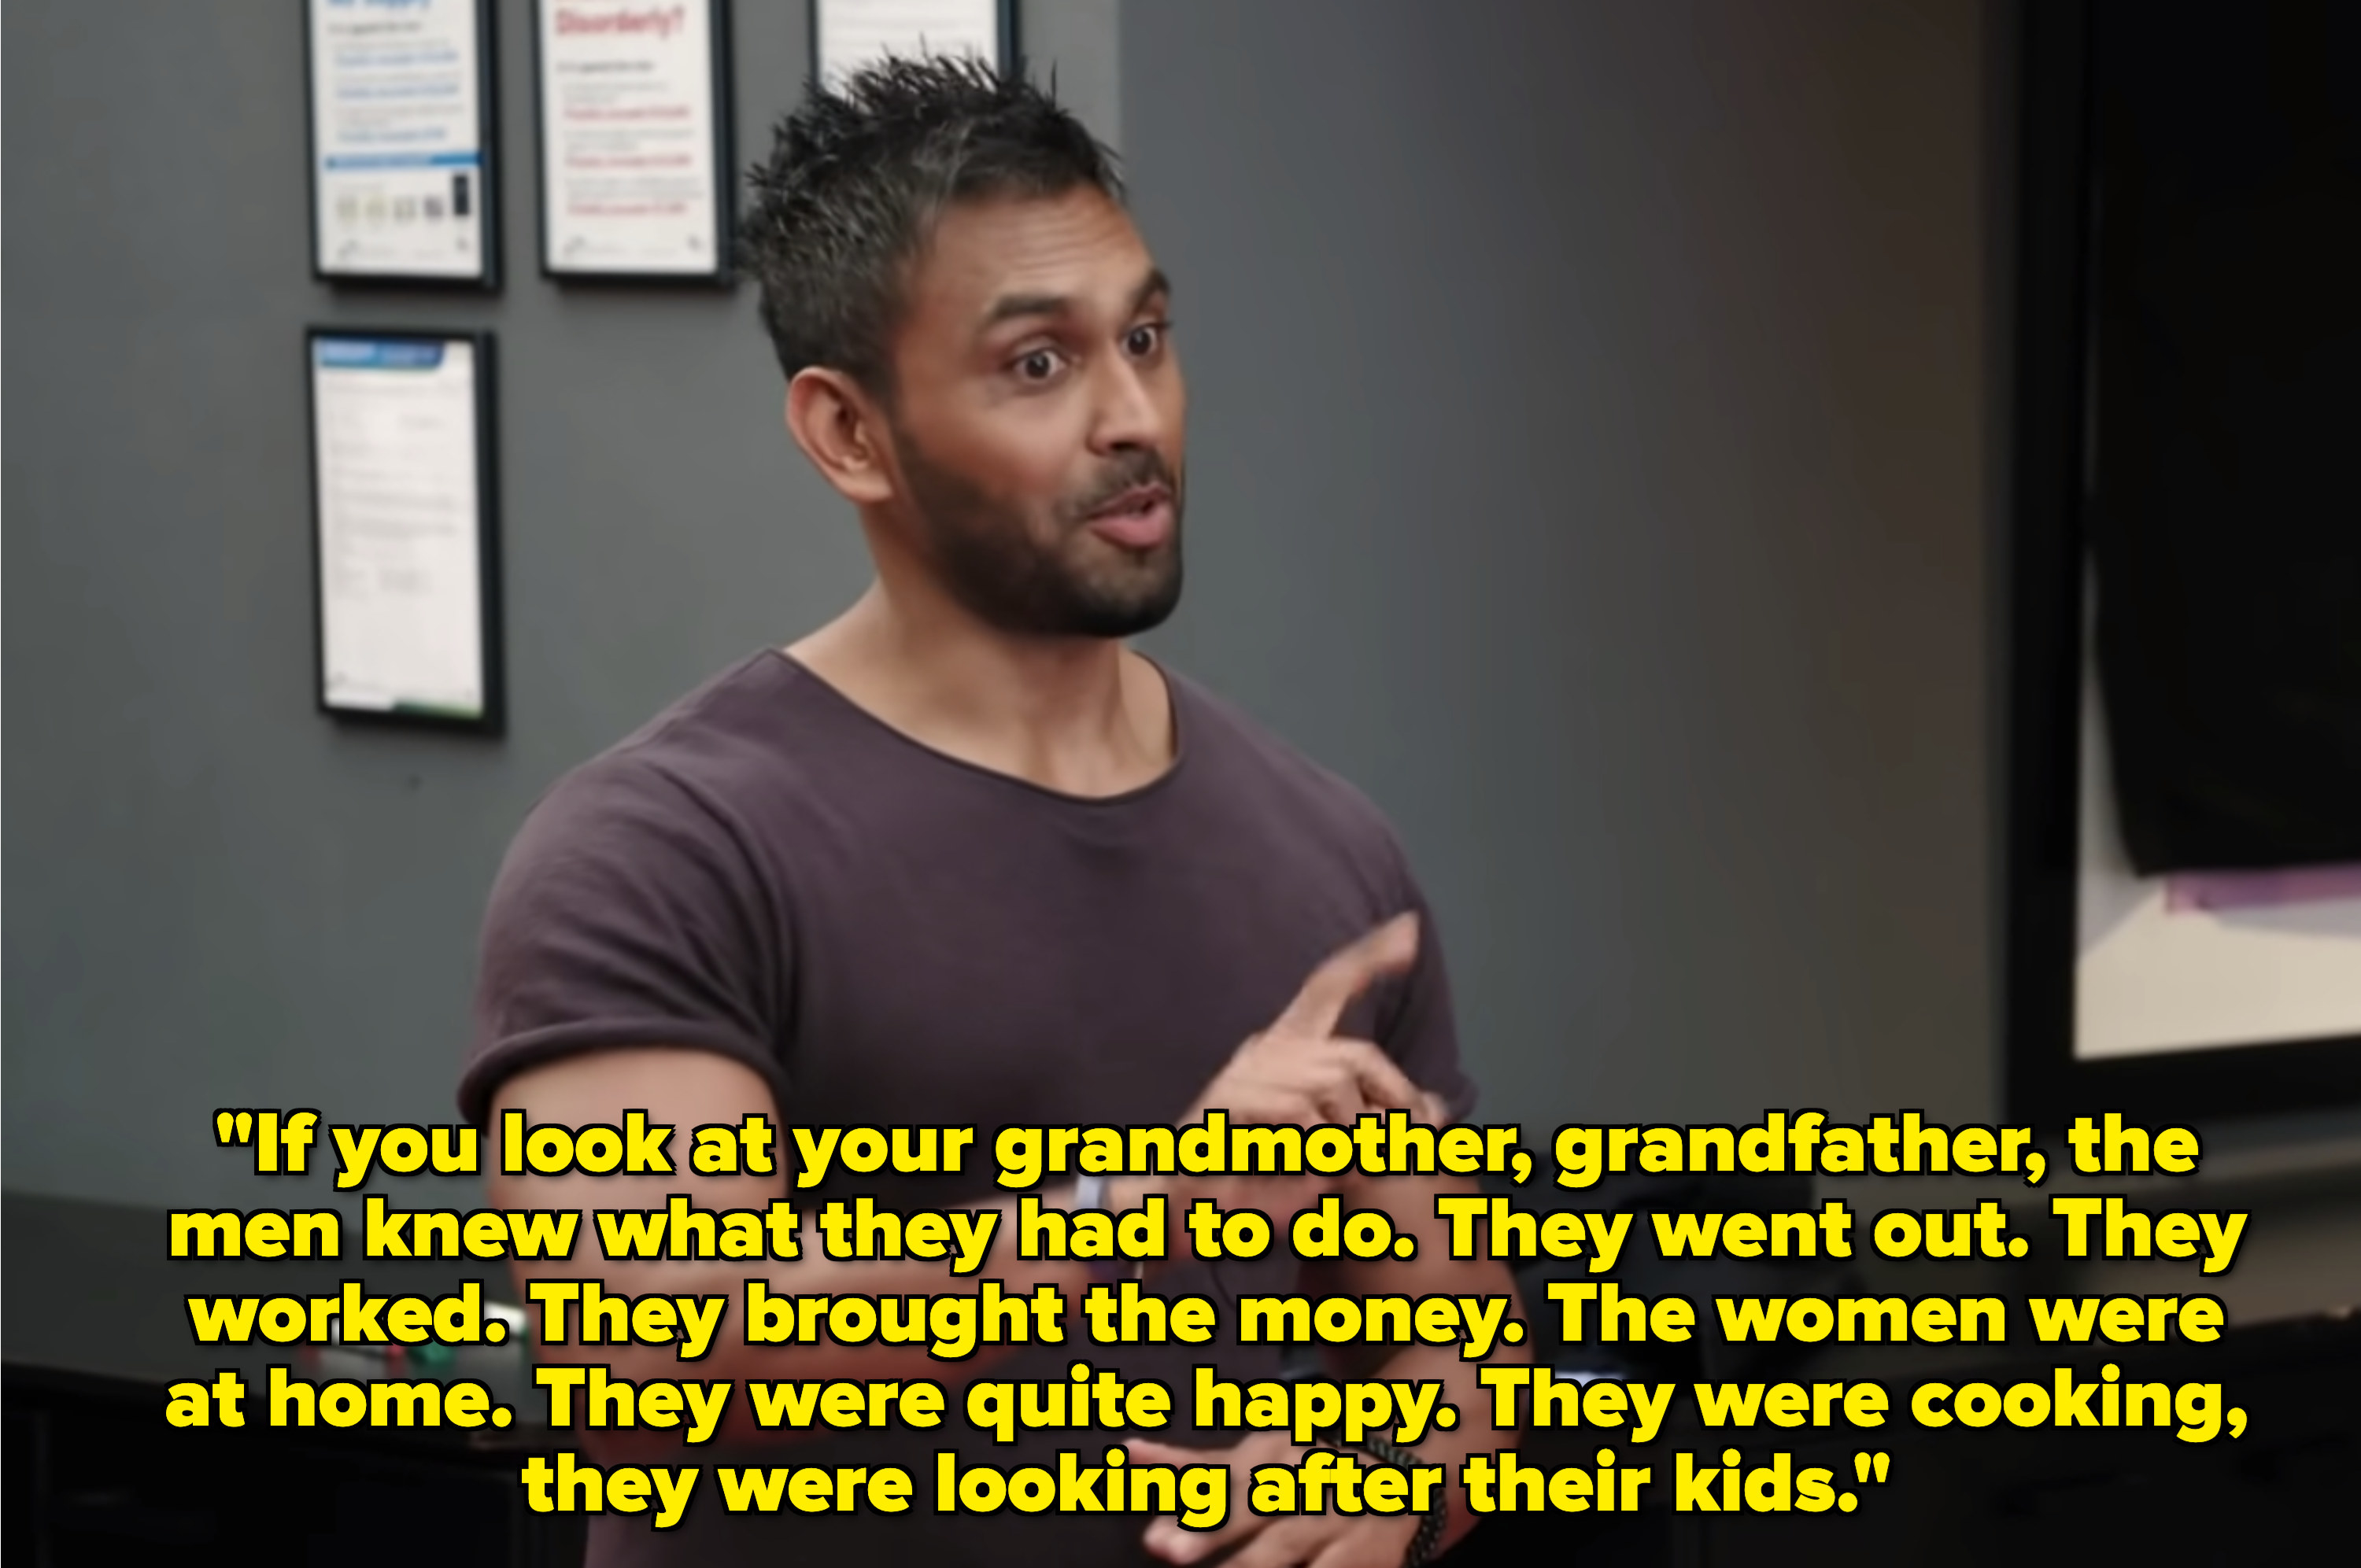 Ash explaining that men used to go out and make money while women stayed at home with the kids.